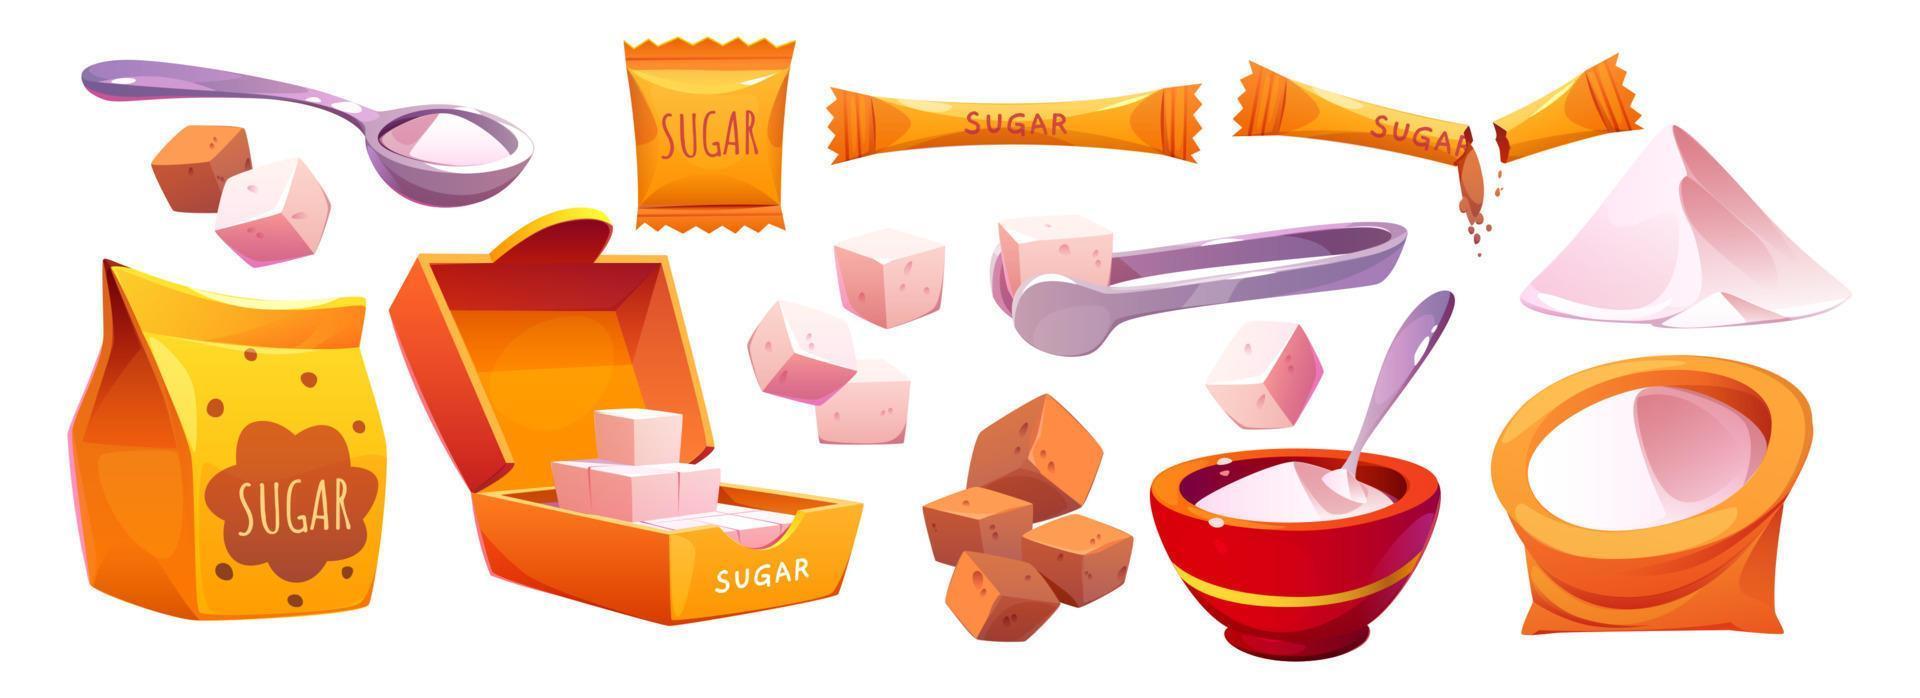 Cartoon set of sugar in different packages vector